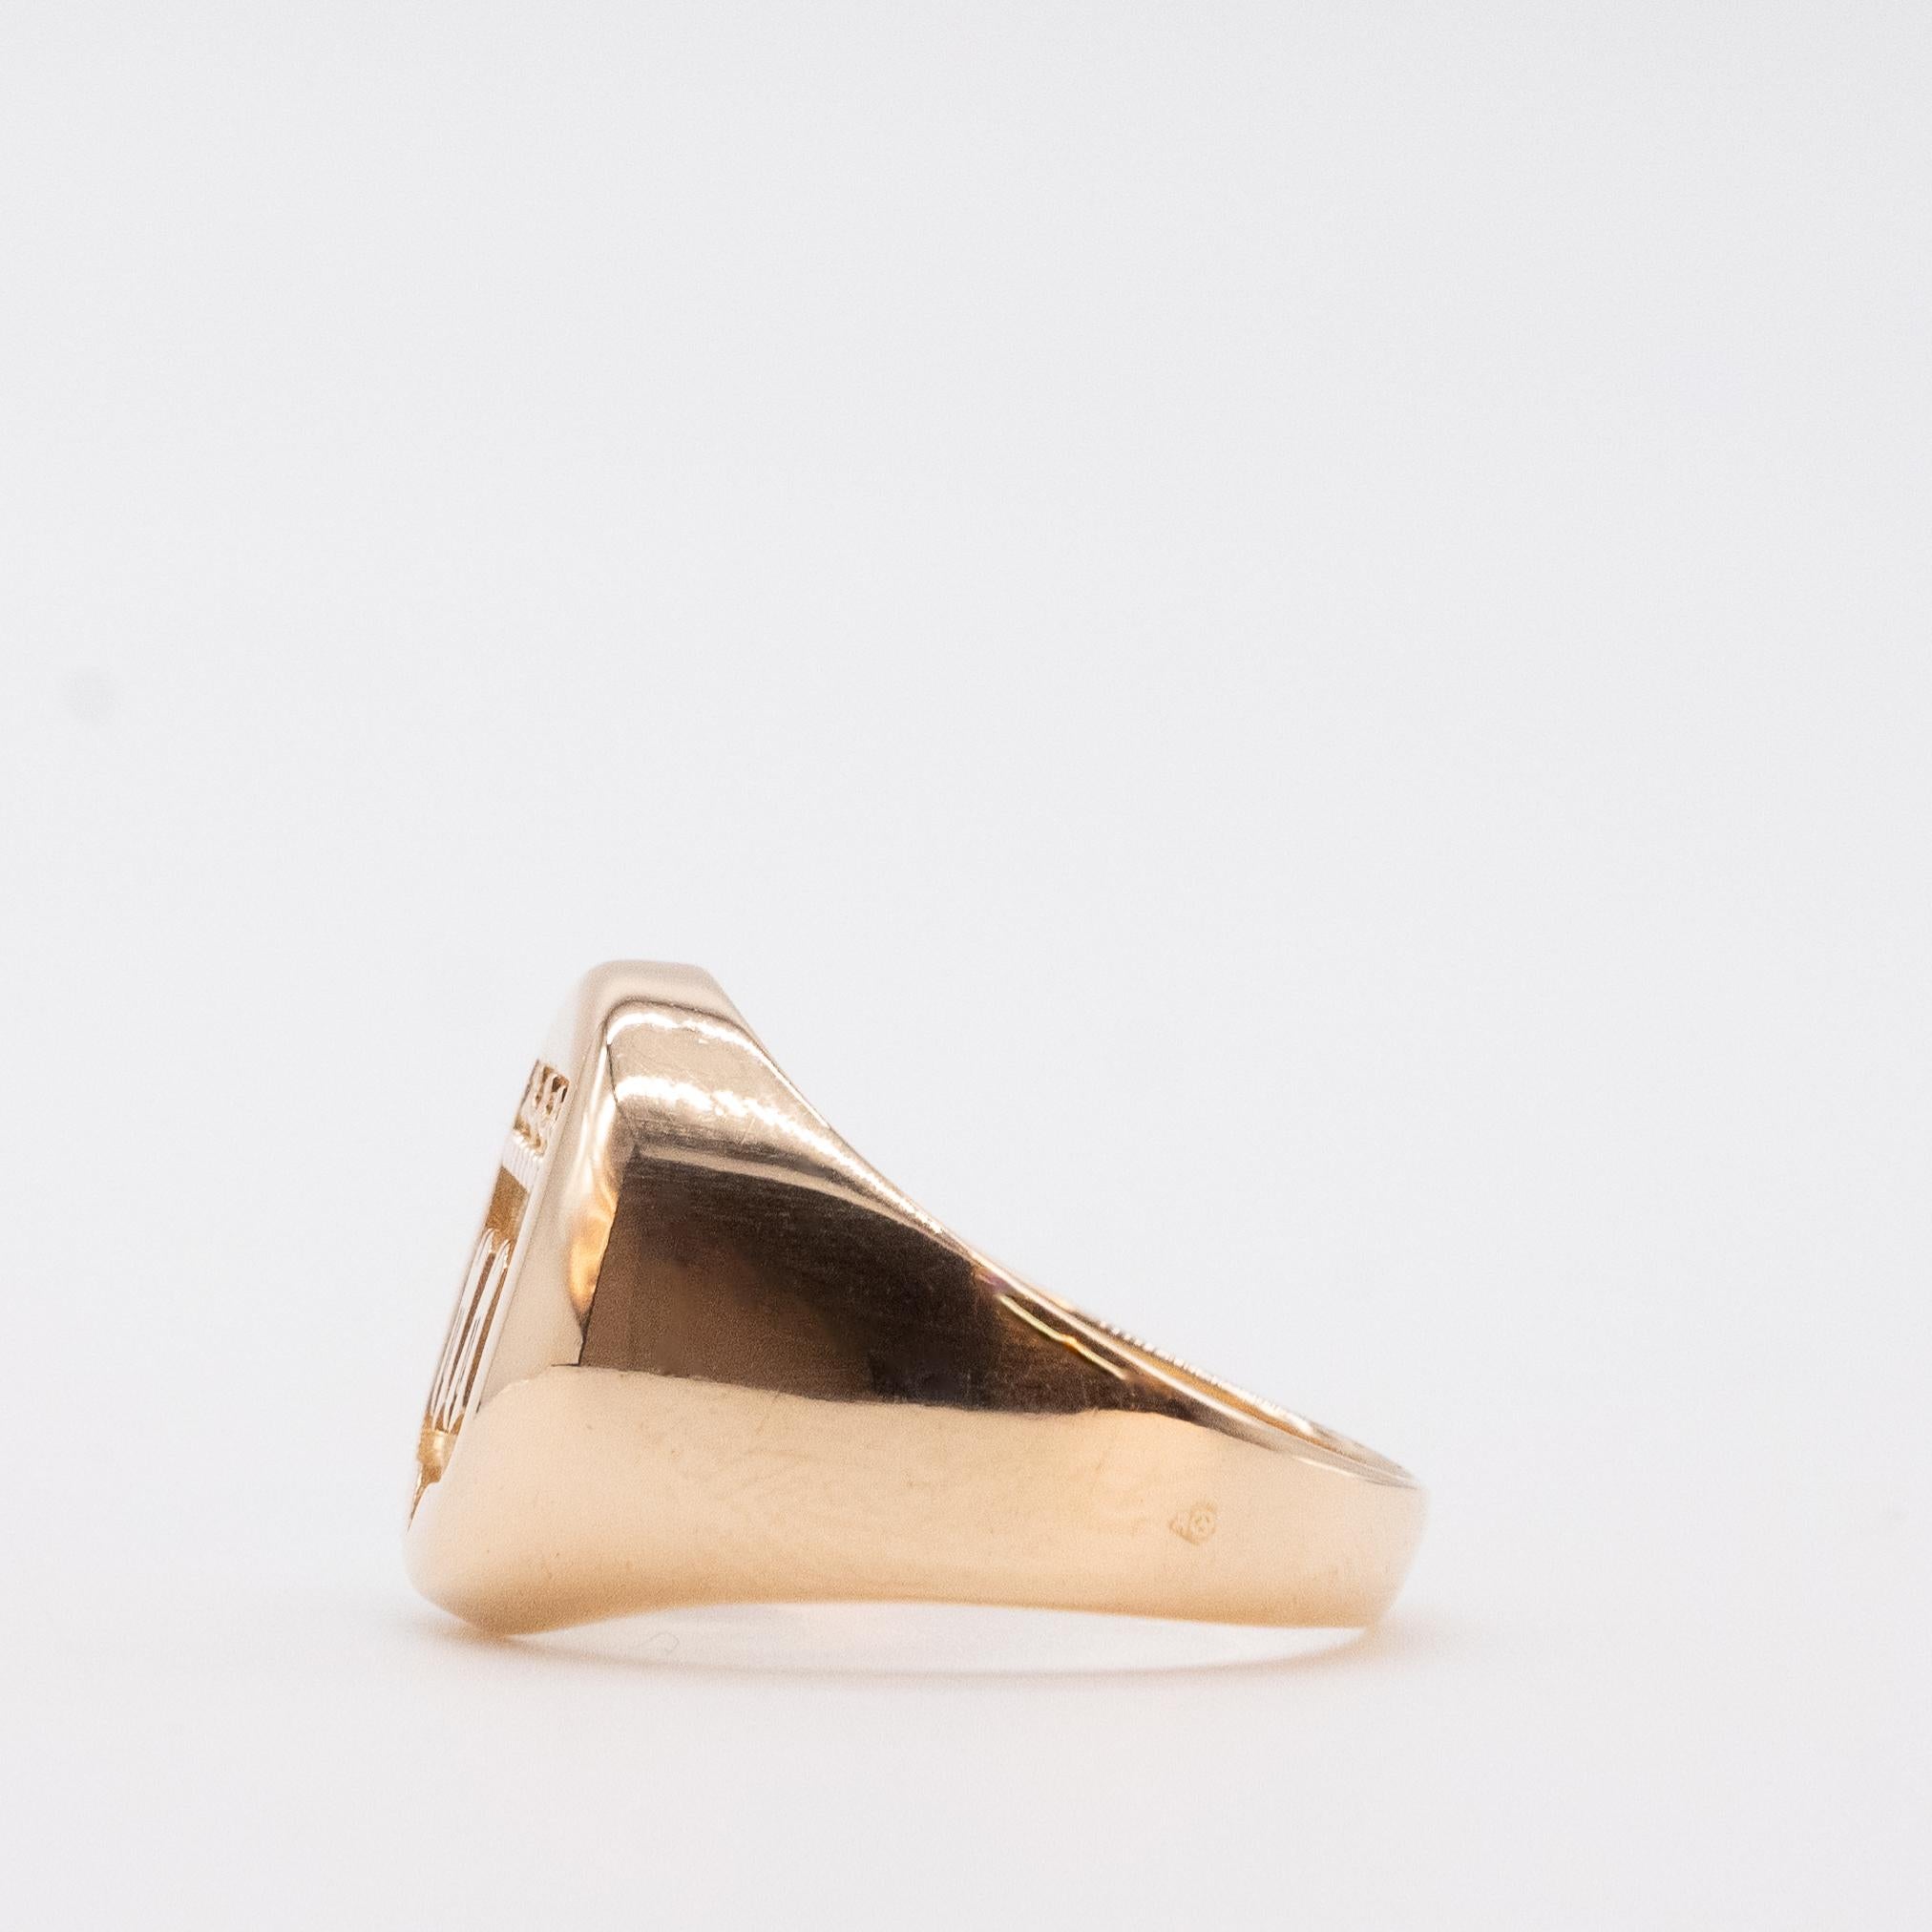 Discover our Marquis signet ring. Precisely crafted from 5.29 grams of 18-carat yellow gold, this ring combines sophistication and style.

A signet ring in 11x13mm format, with a slender, shapely body. This ring is ideal for young girl's